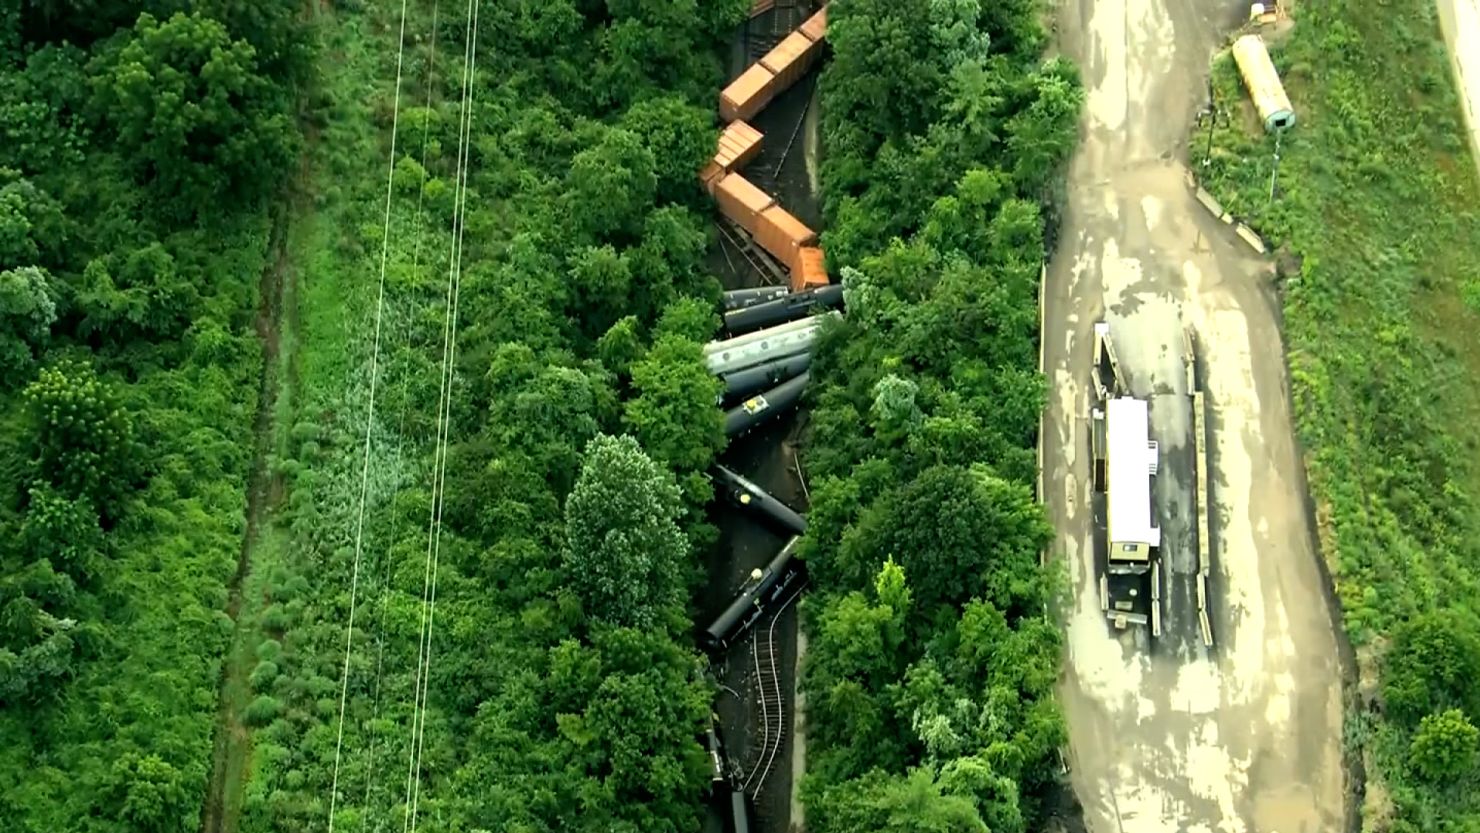 CSX says the weather was apparently a factor in the derailment of its train Monday morning.